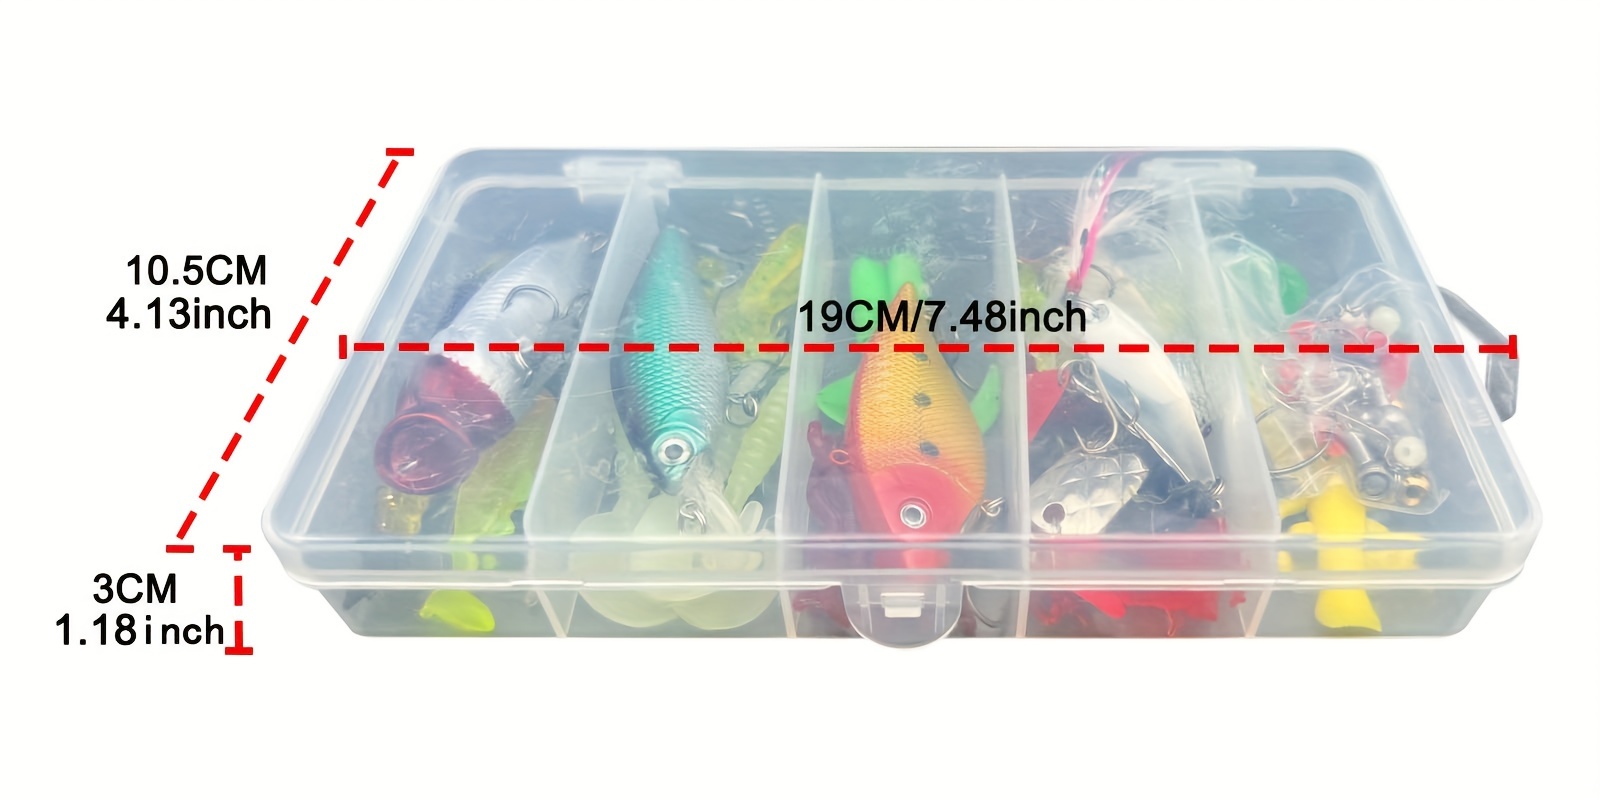 Yosoo Health Gear Floating Ball Stopper, 1000pcs/Box Plastic Round Beads  Fishing Tackle Lures Tools Accessory for Outdoor Fishing